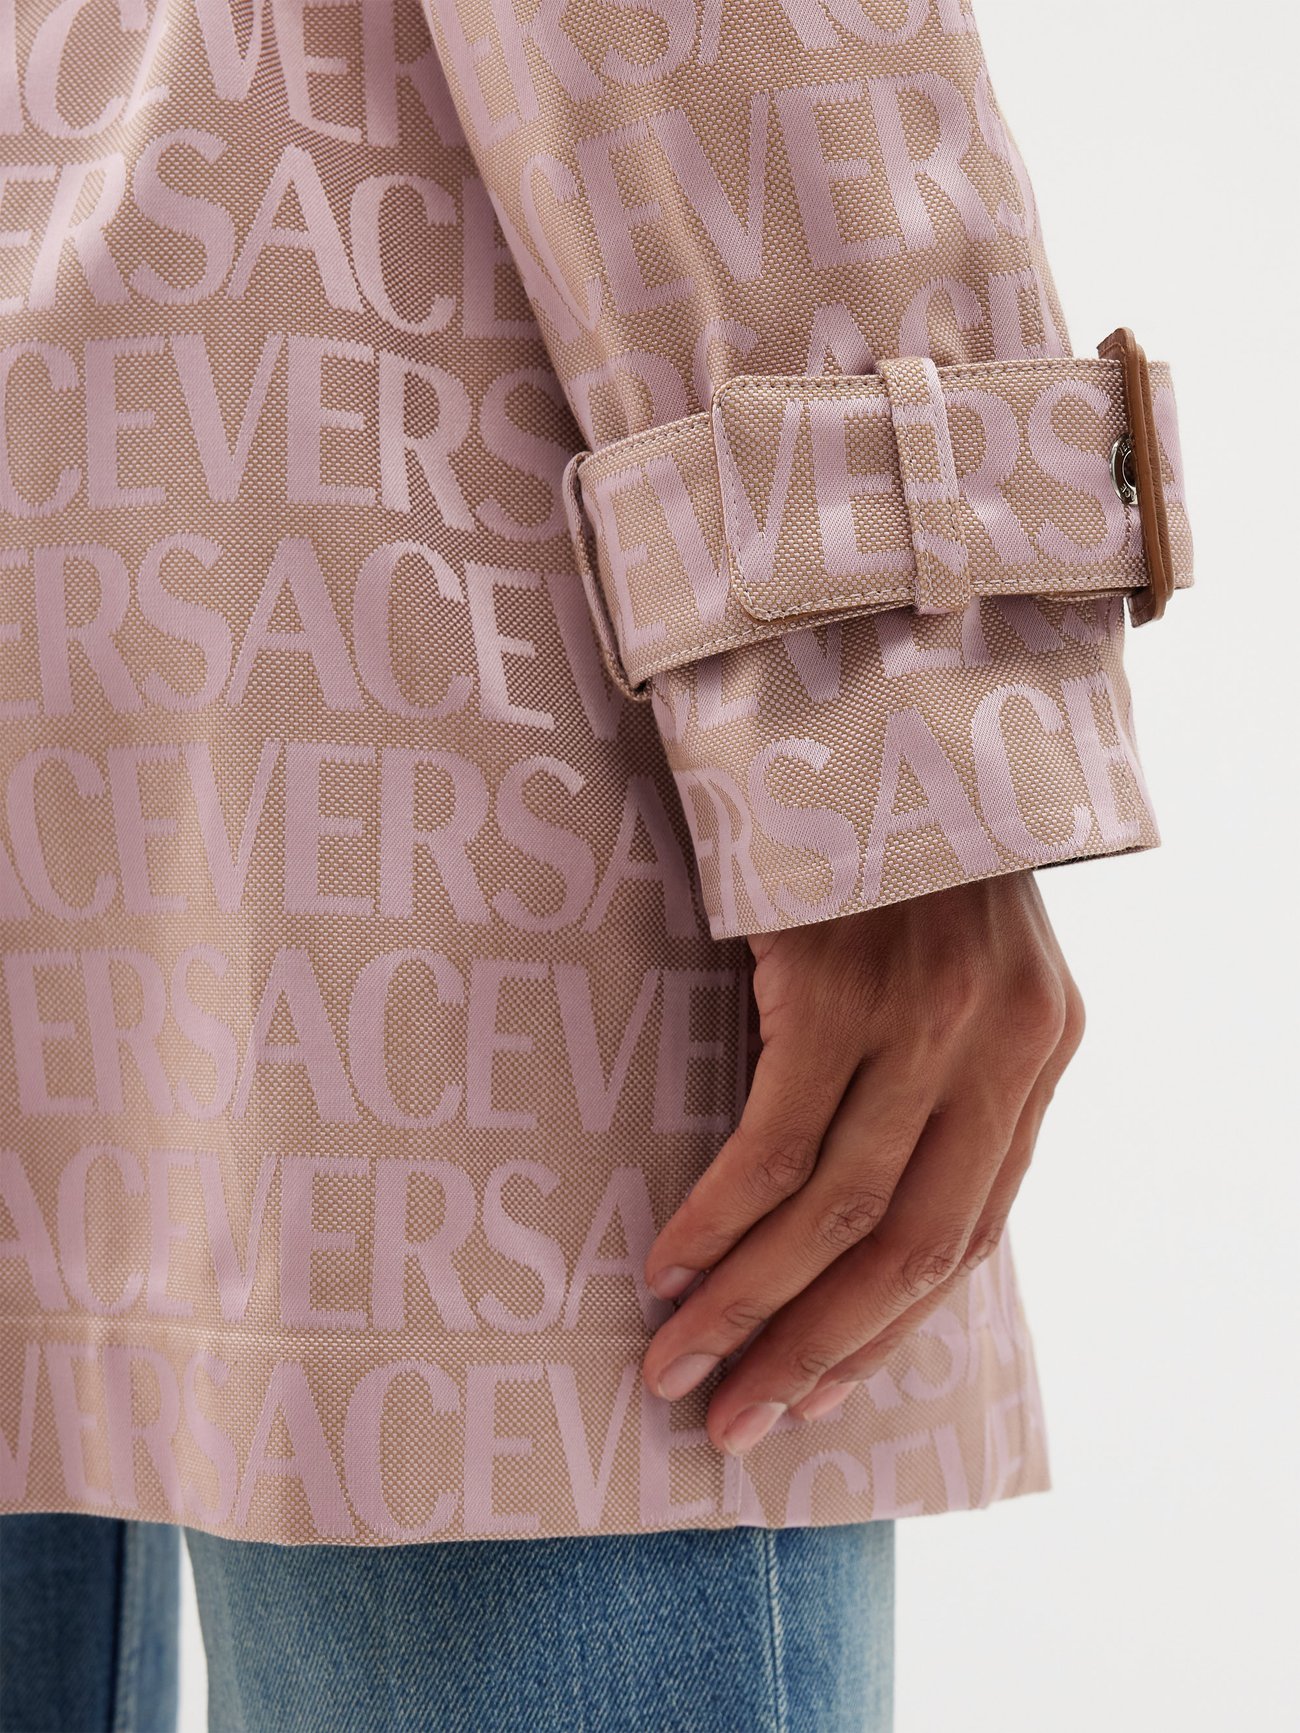 Versace Allover-jacquard Trench Coat